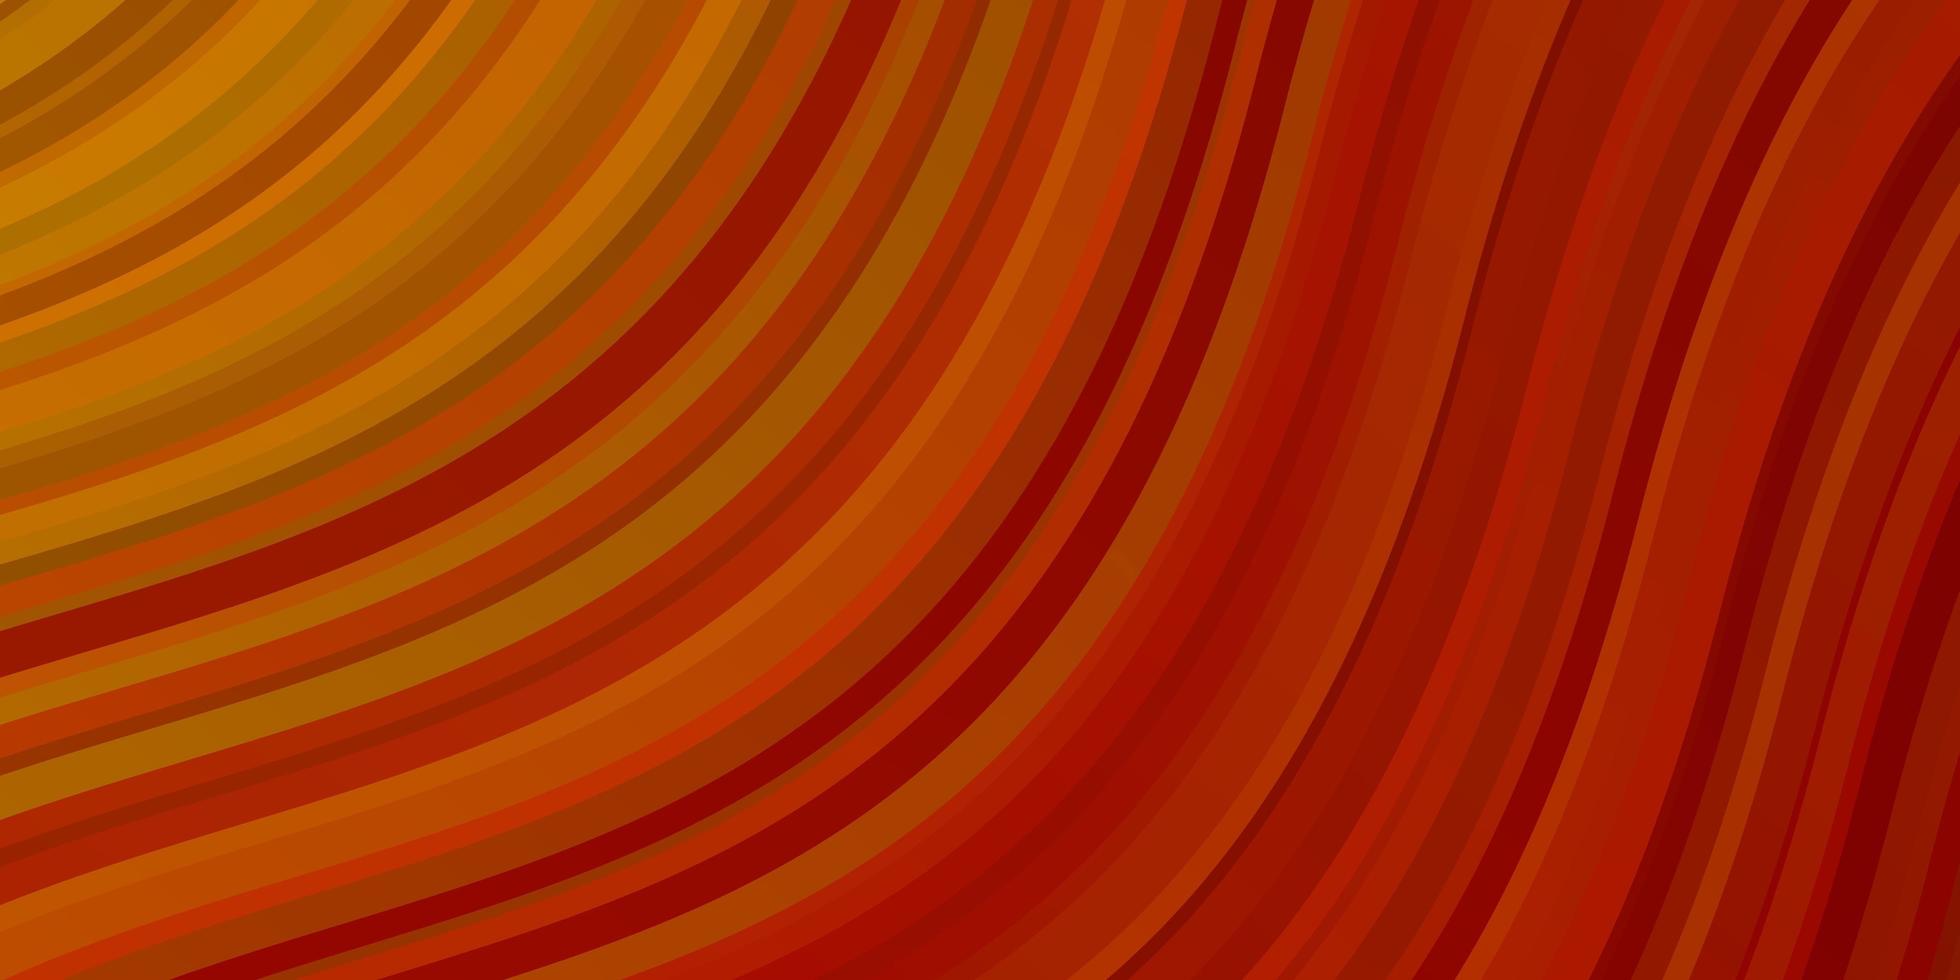 Light Orange vector background with bows. Bright sample with colorful bent lines, shapes. Template for your UI design.